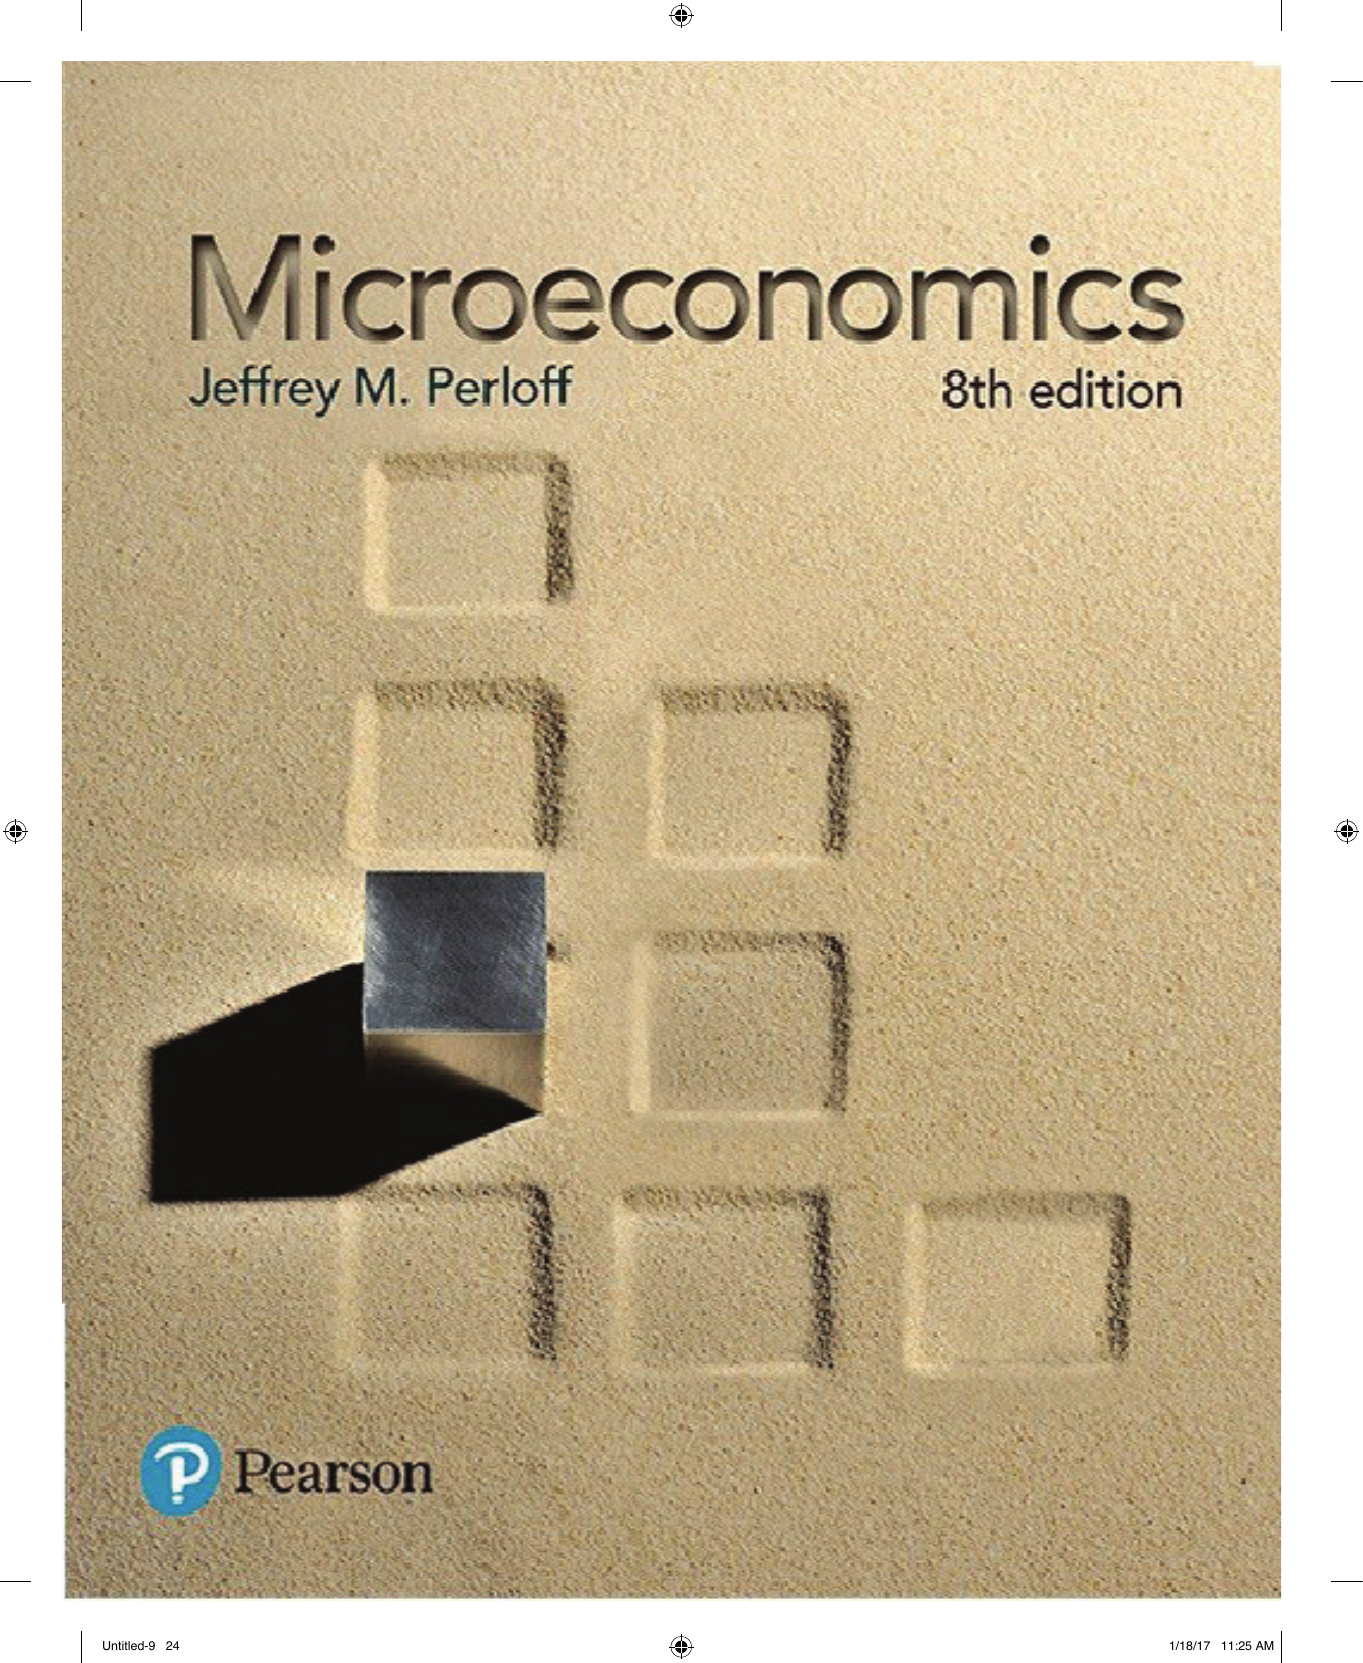 Download 2to3 Mint Videoporn Video - Microeconomics 8th Edition Editoin by Jeffrey M. Perloff